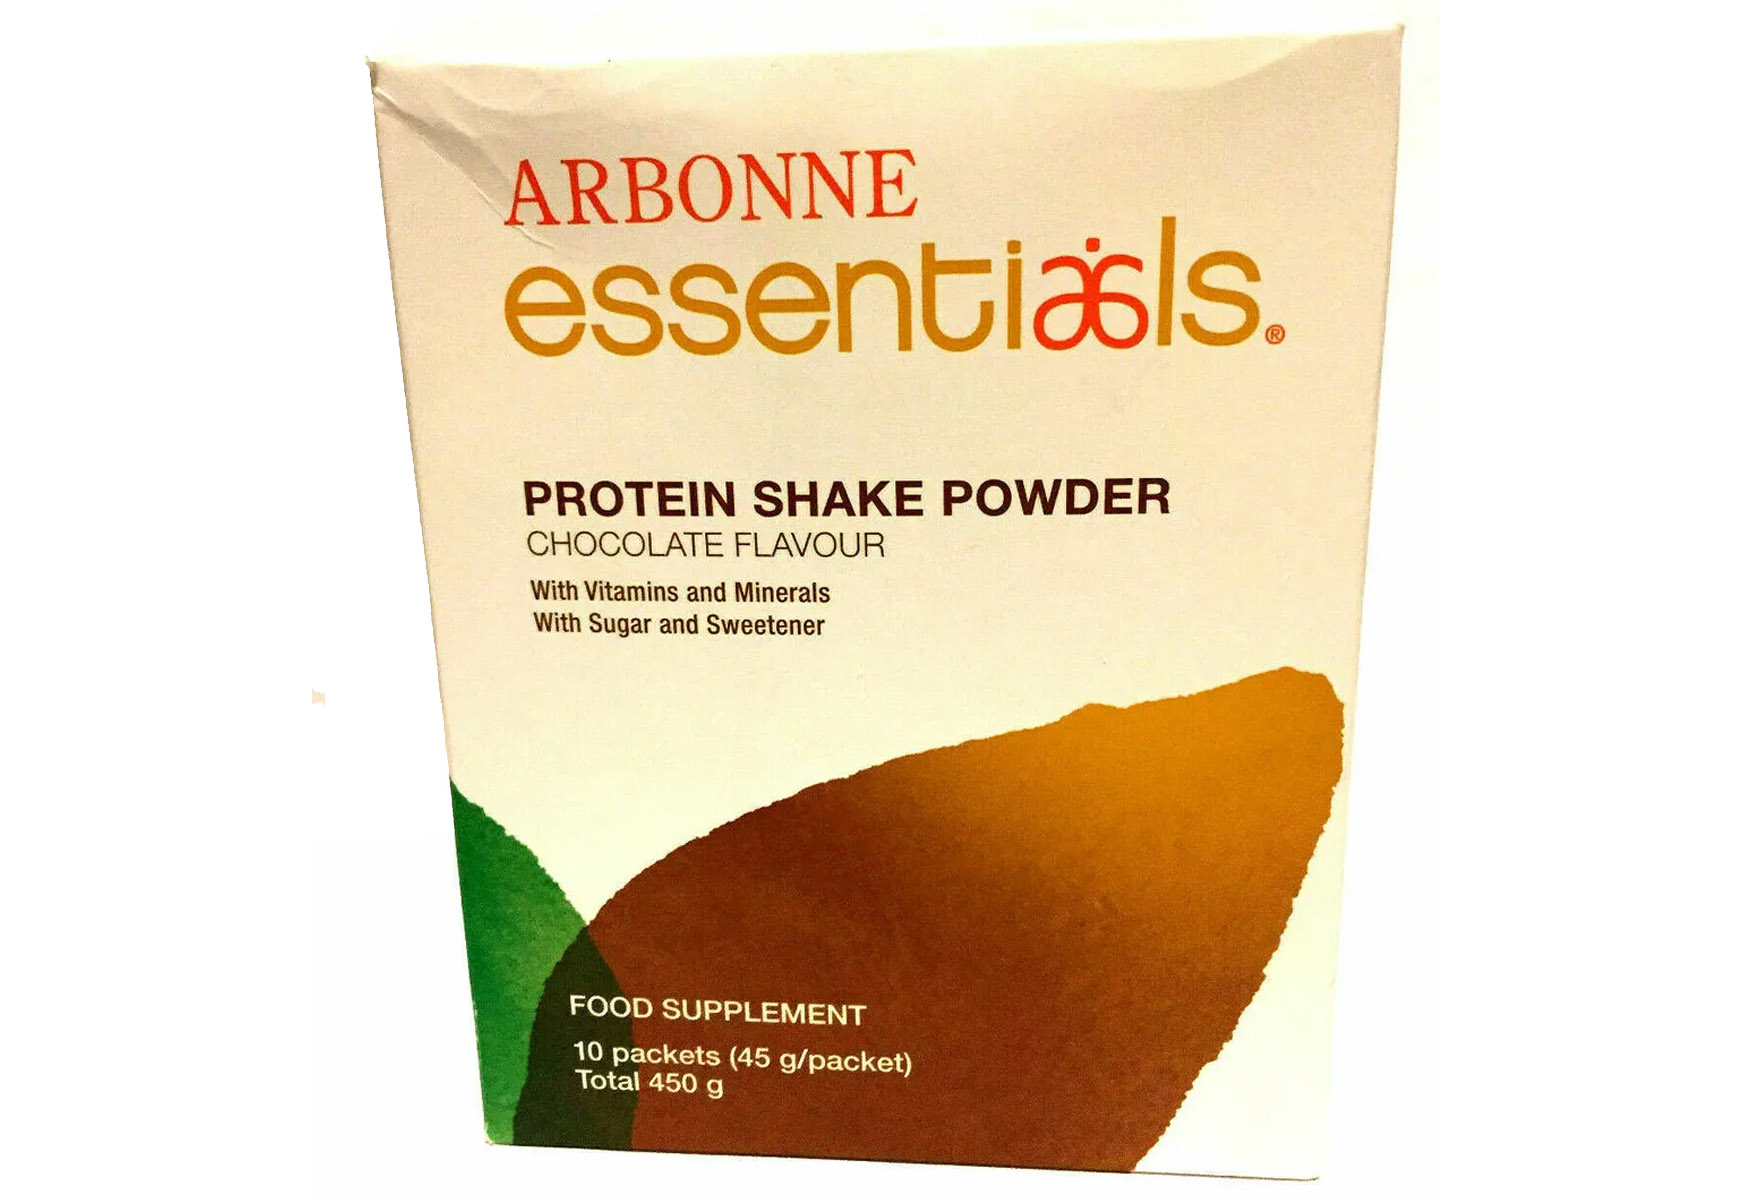 Arbonne boosts lead generation by 30% per month using OnePageCRM